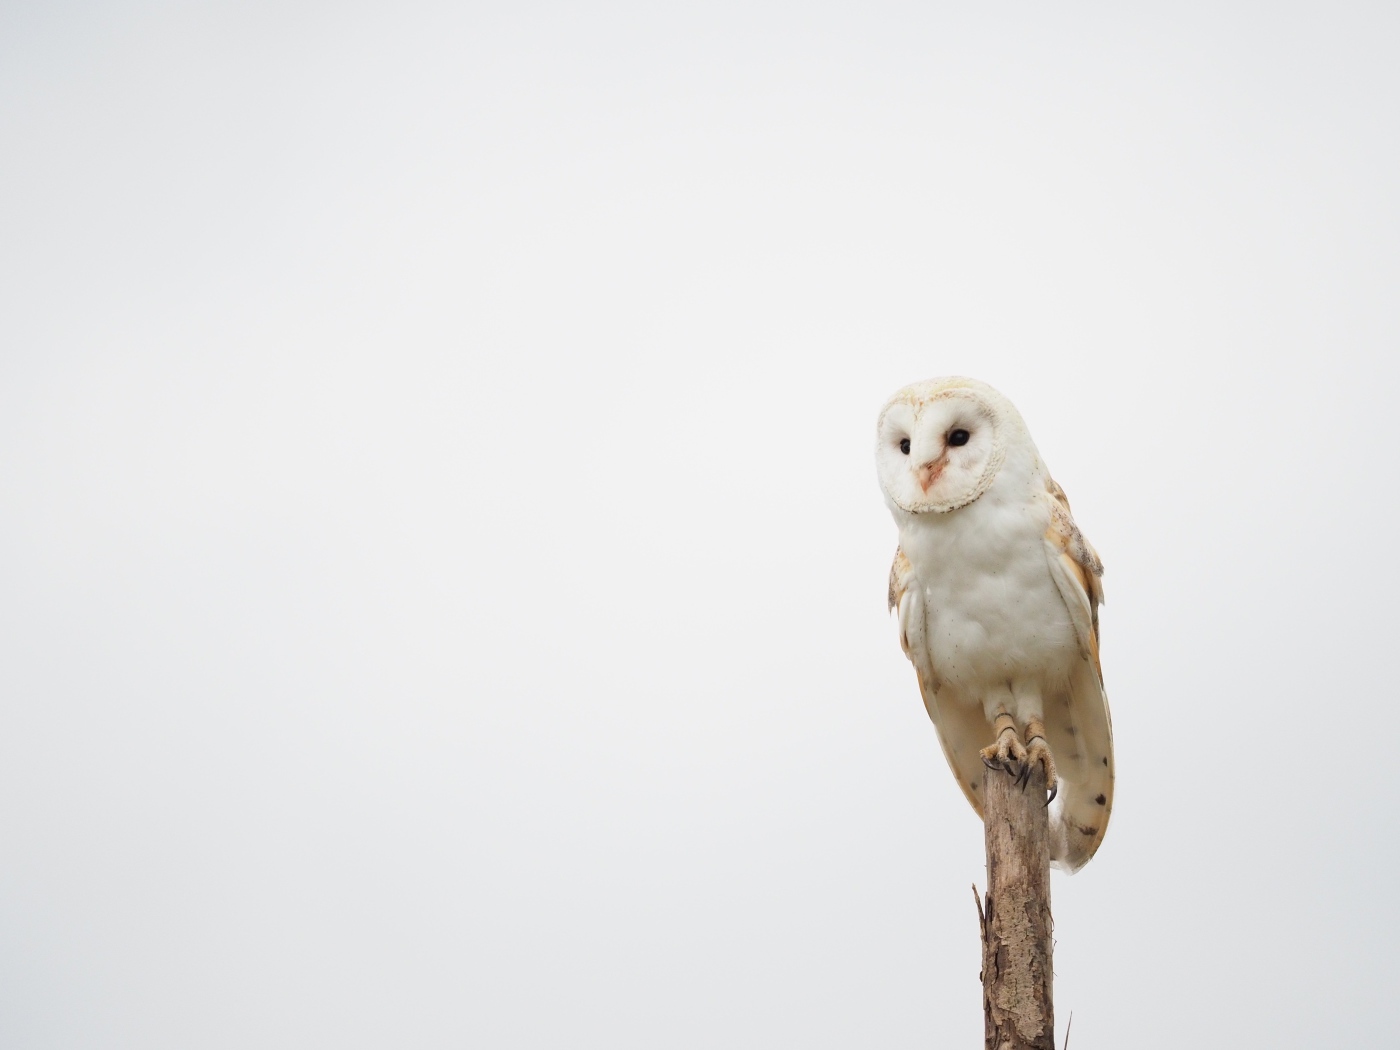 Large owl sits on a branch on a gray background